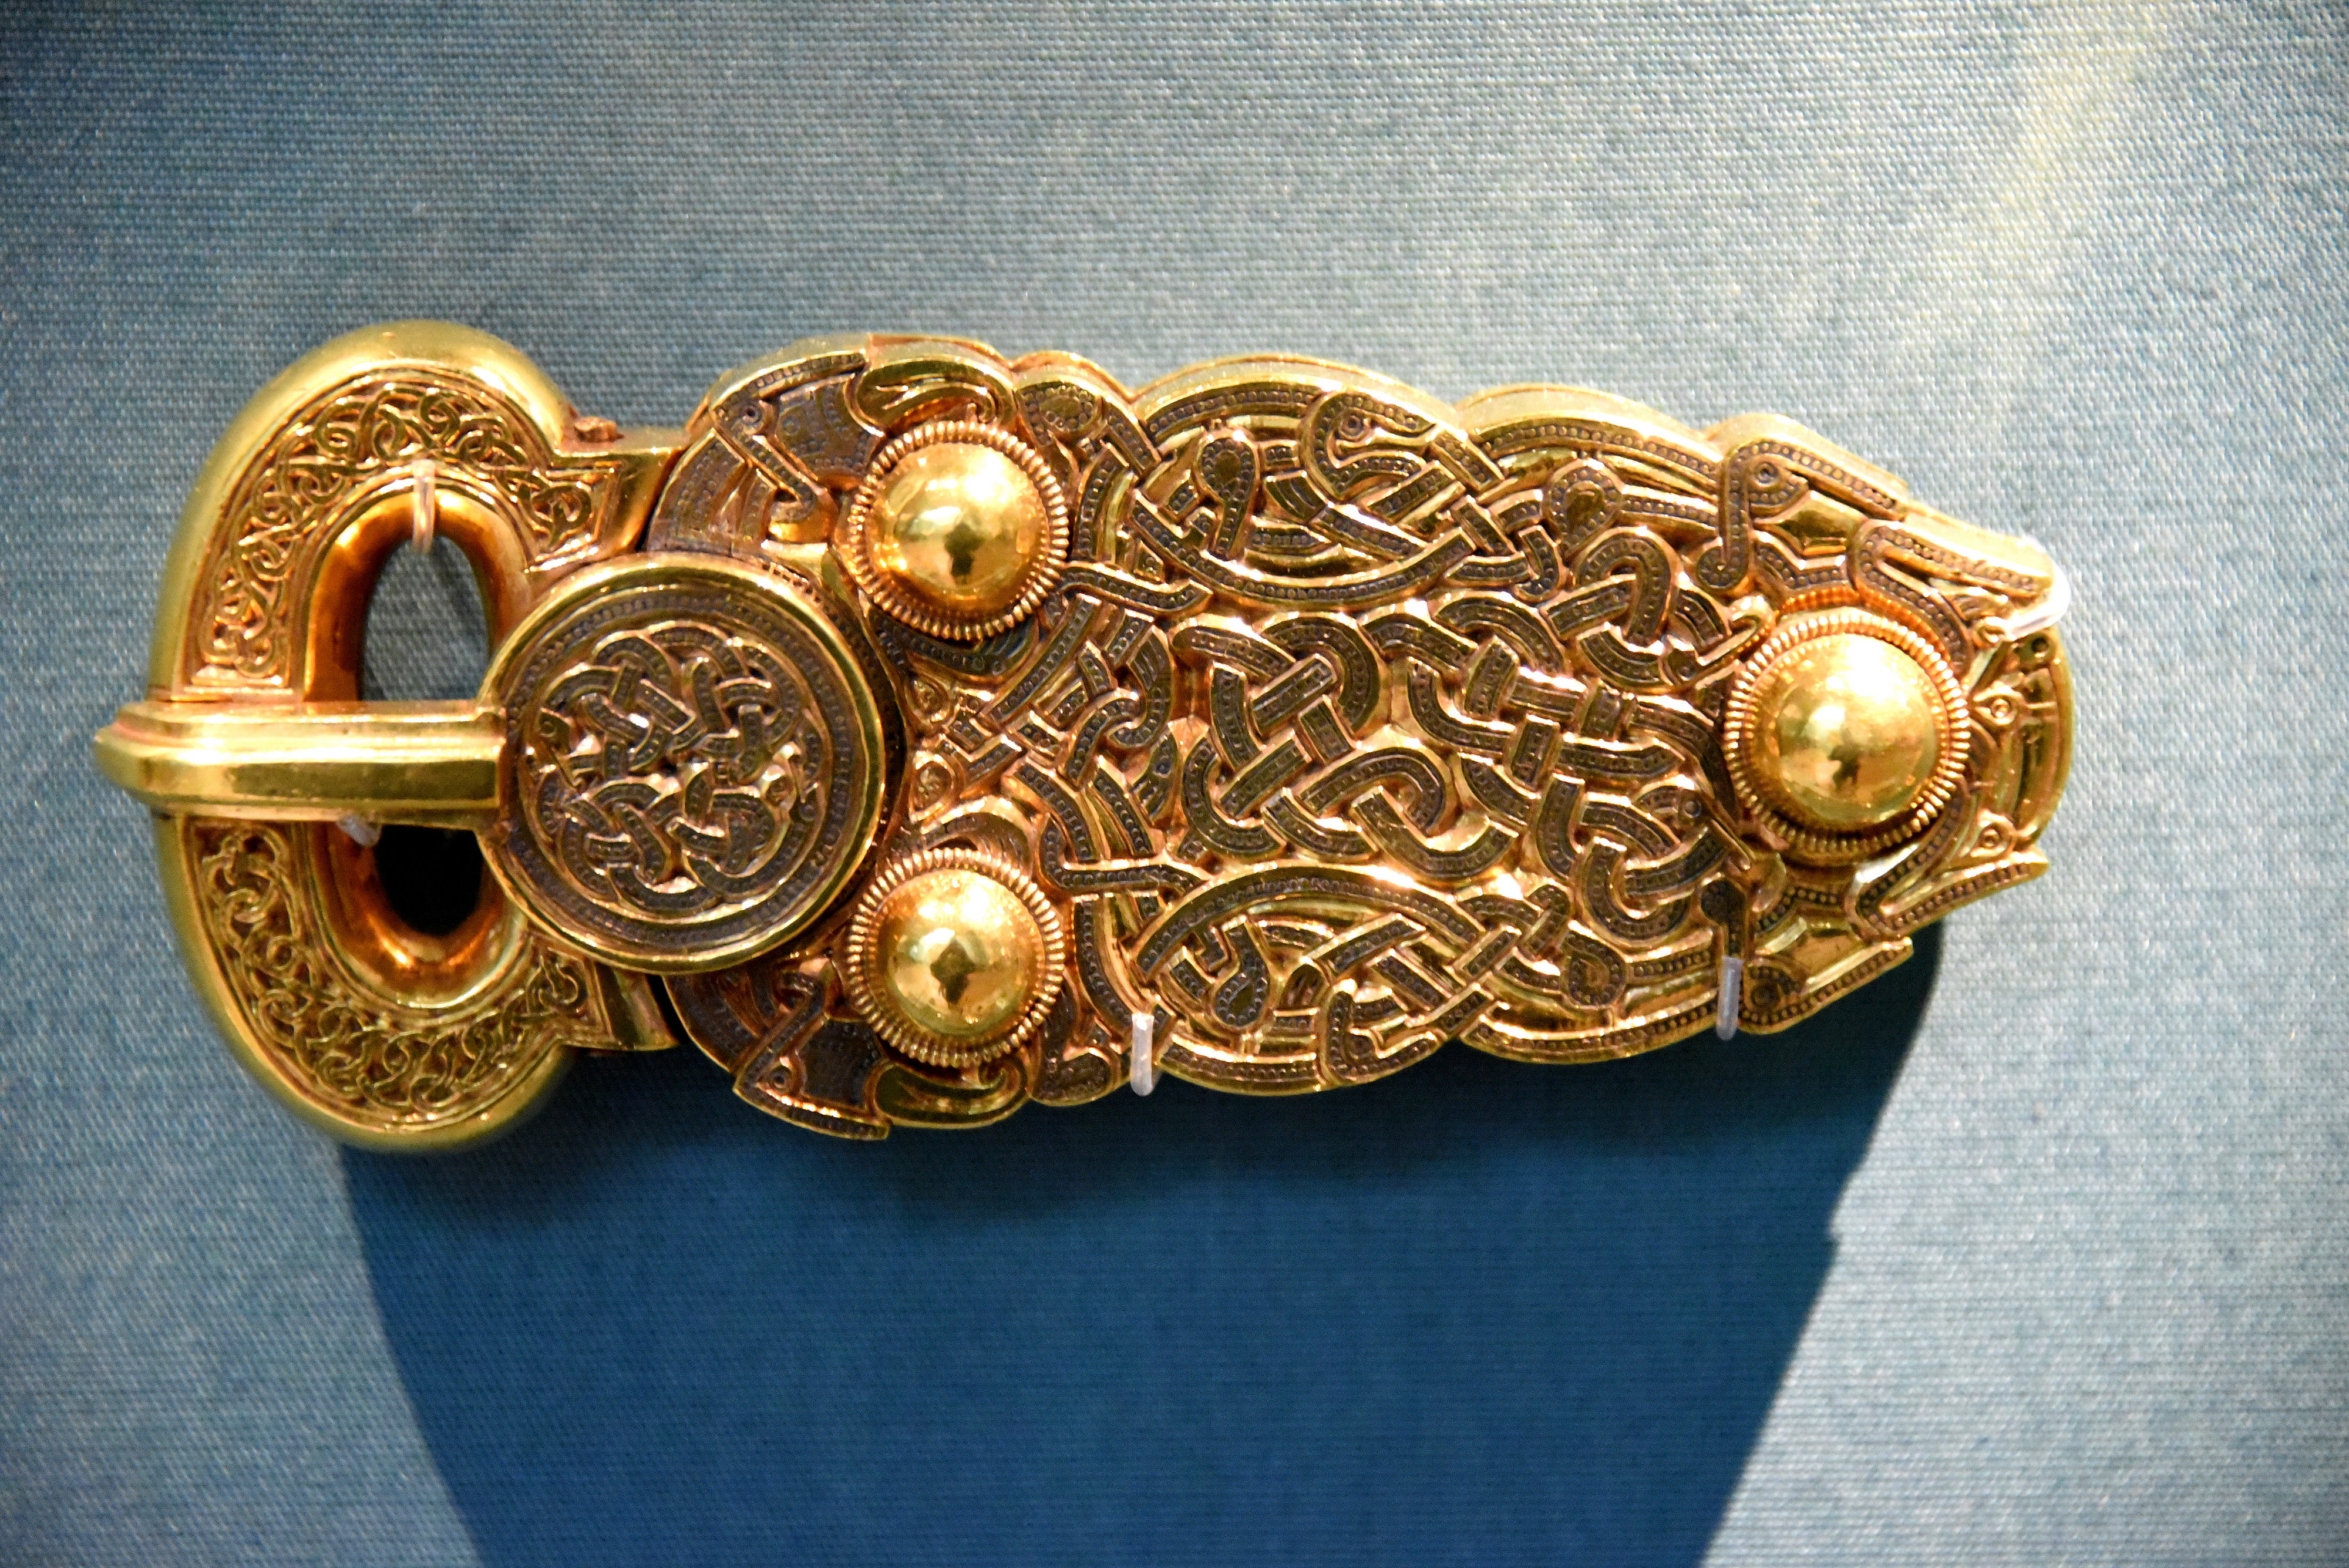 The Sutton Hoo Great Gold Buckle (Illustration) - World History